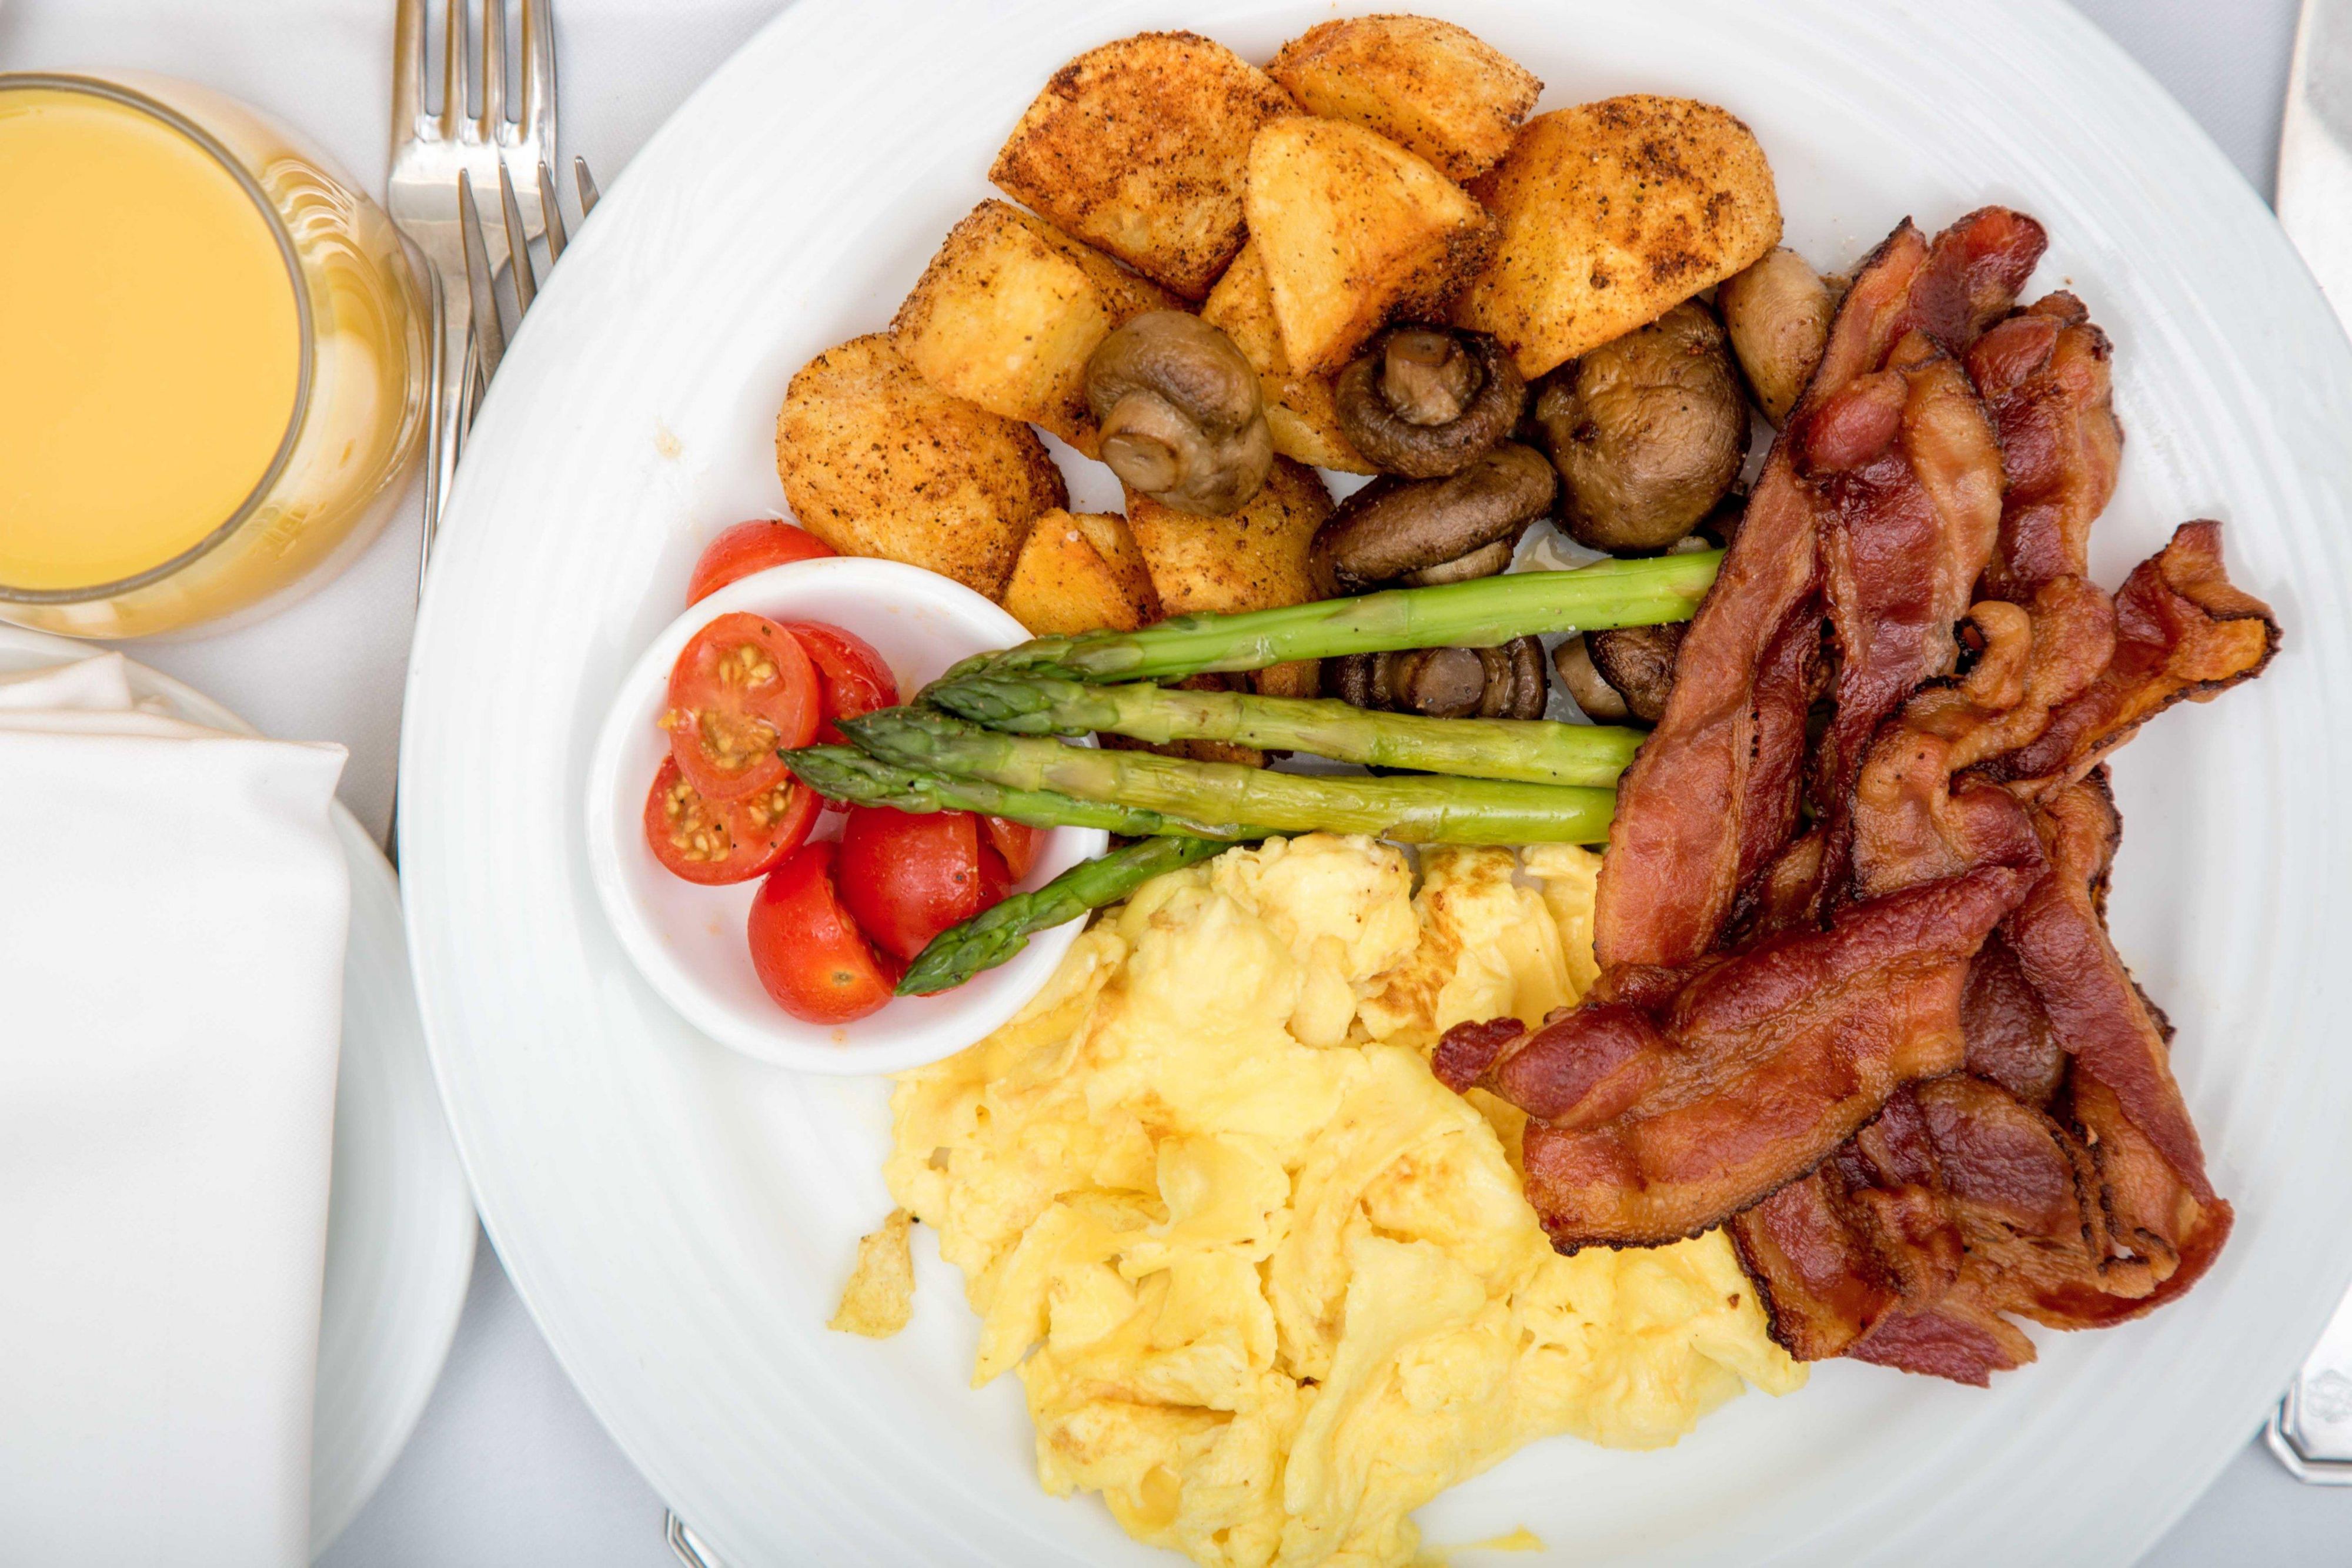 Start each "Suite" day right with our Hot Breakfast and Freshly prepared favorites.
Breakfast Times begin Monday-Friday from 6:30am-9:30am. Saturday & Sunday from 7:00am-10:00am.